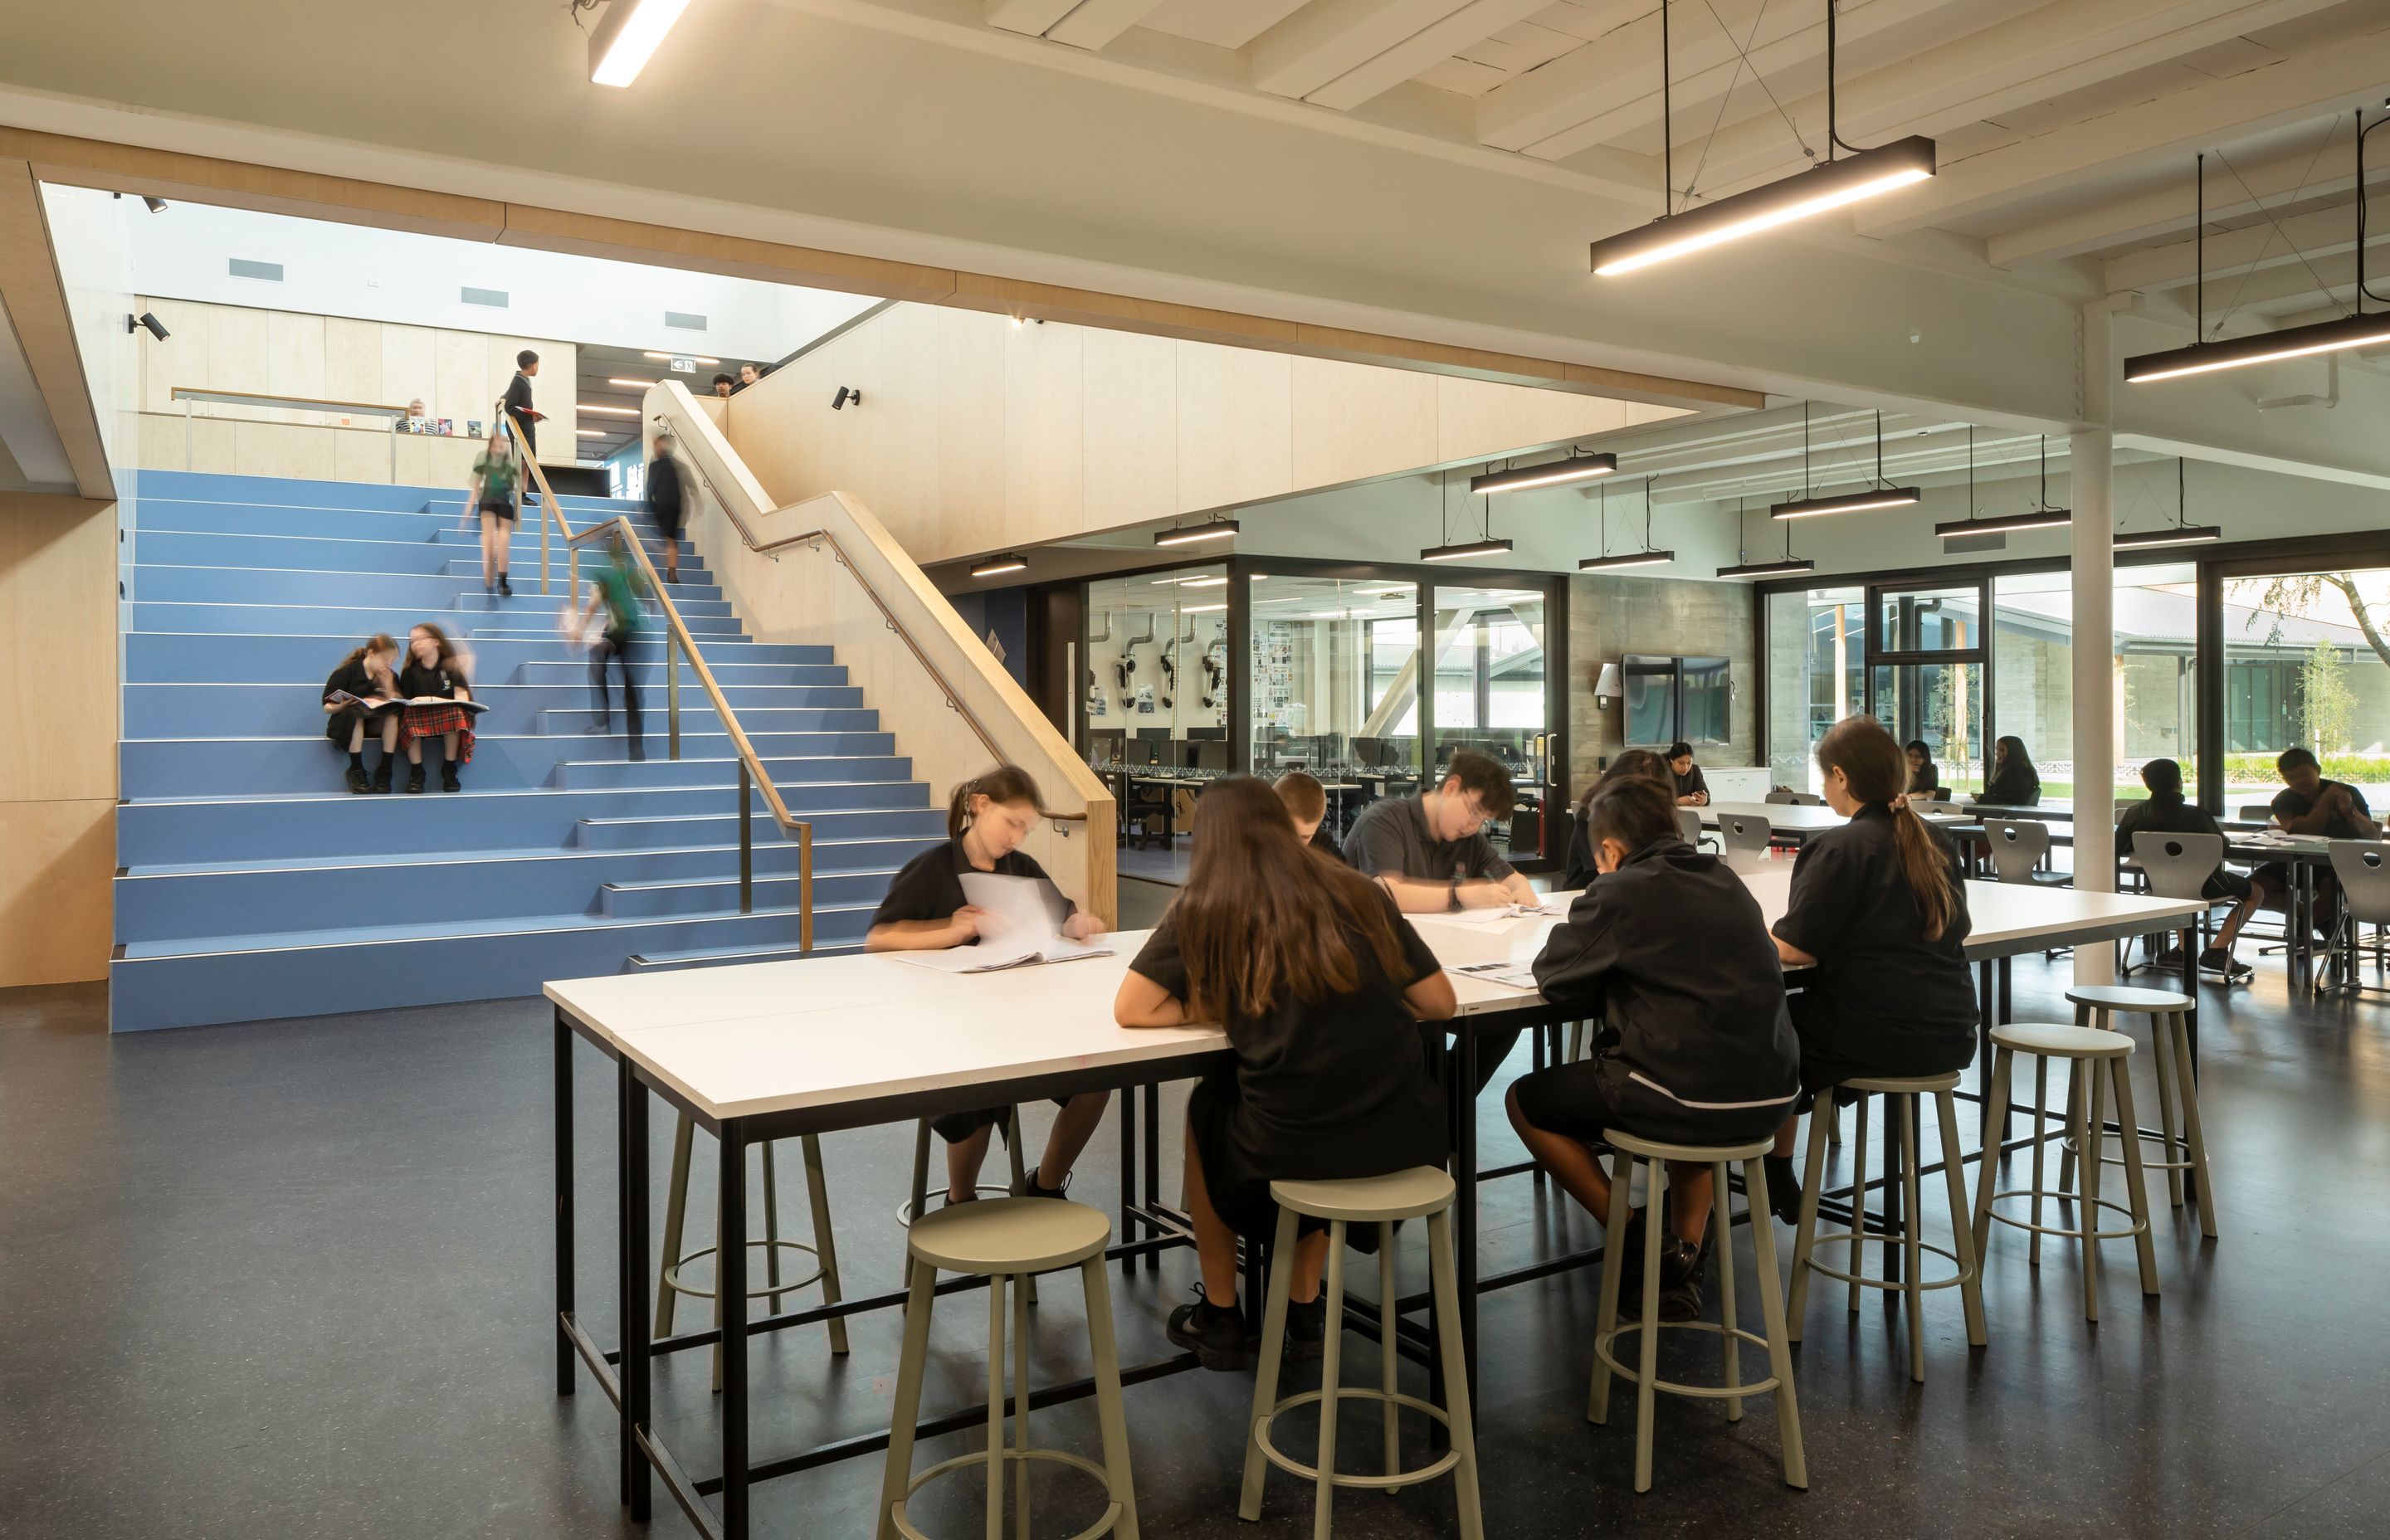 Students work in open-plan break-out spaces in the 'maker' hub.